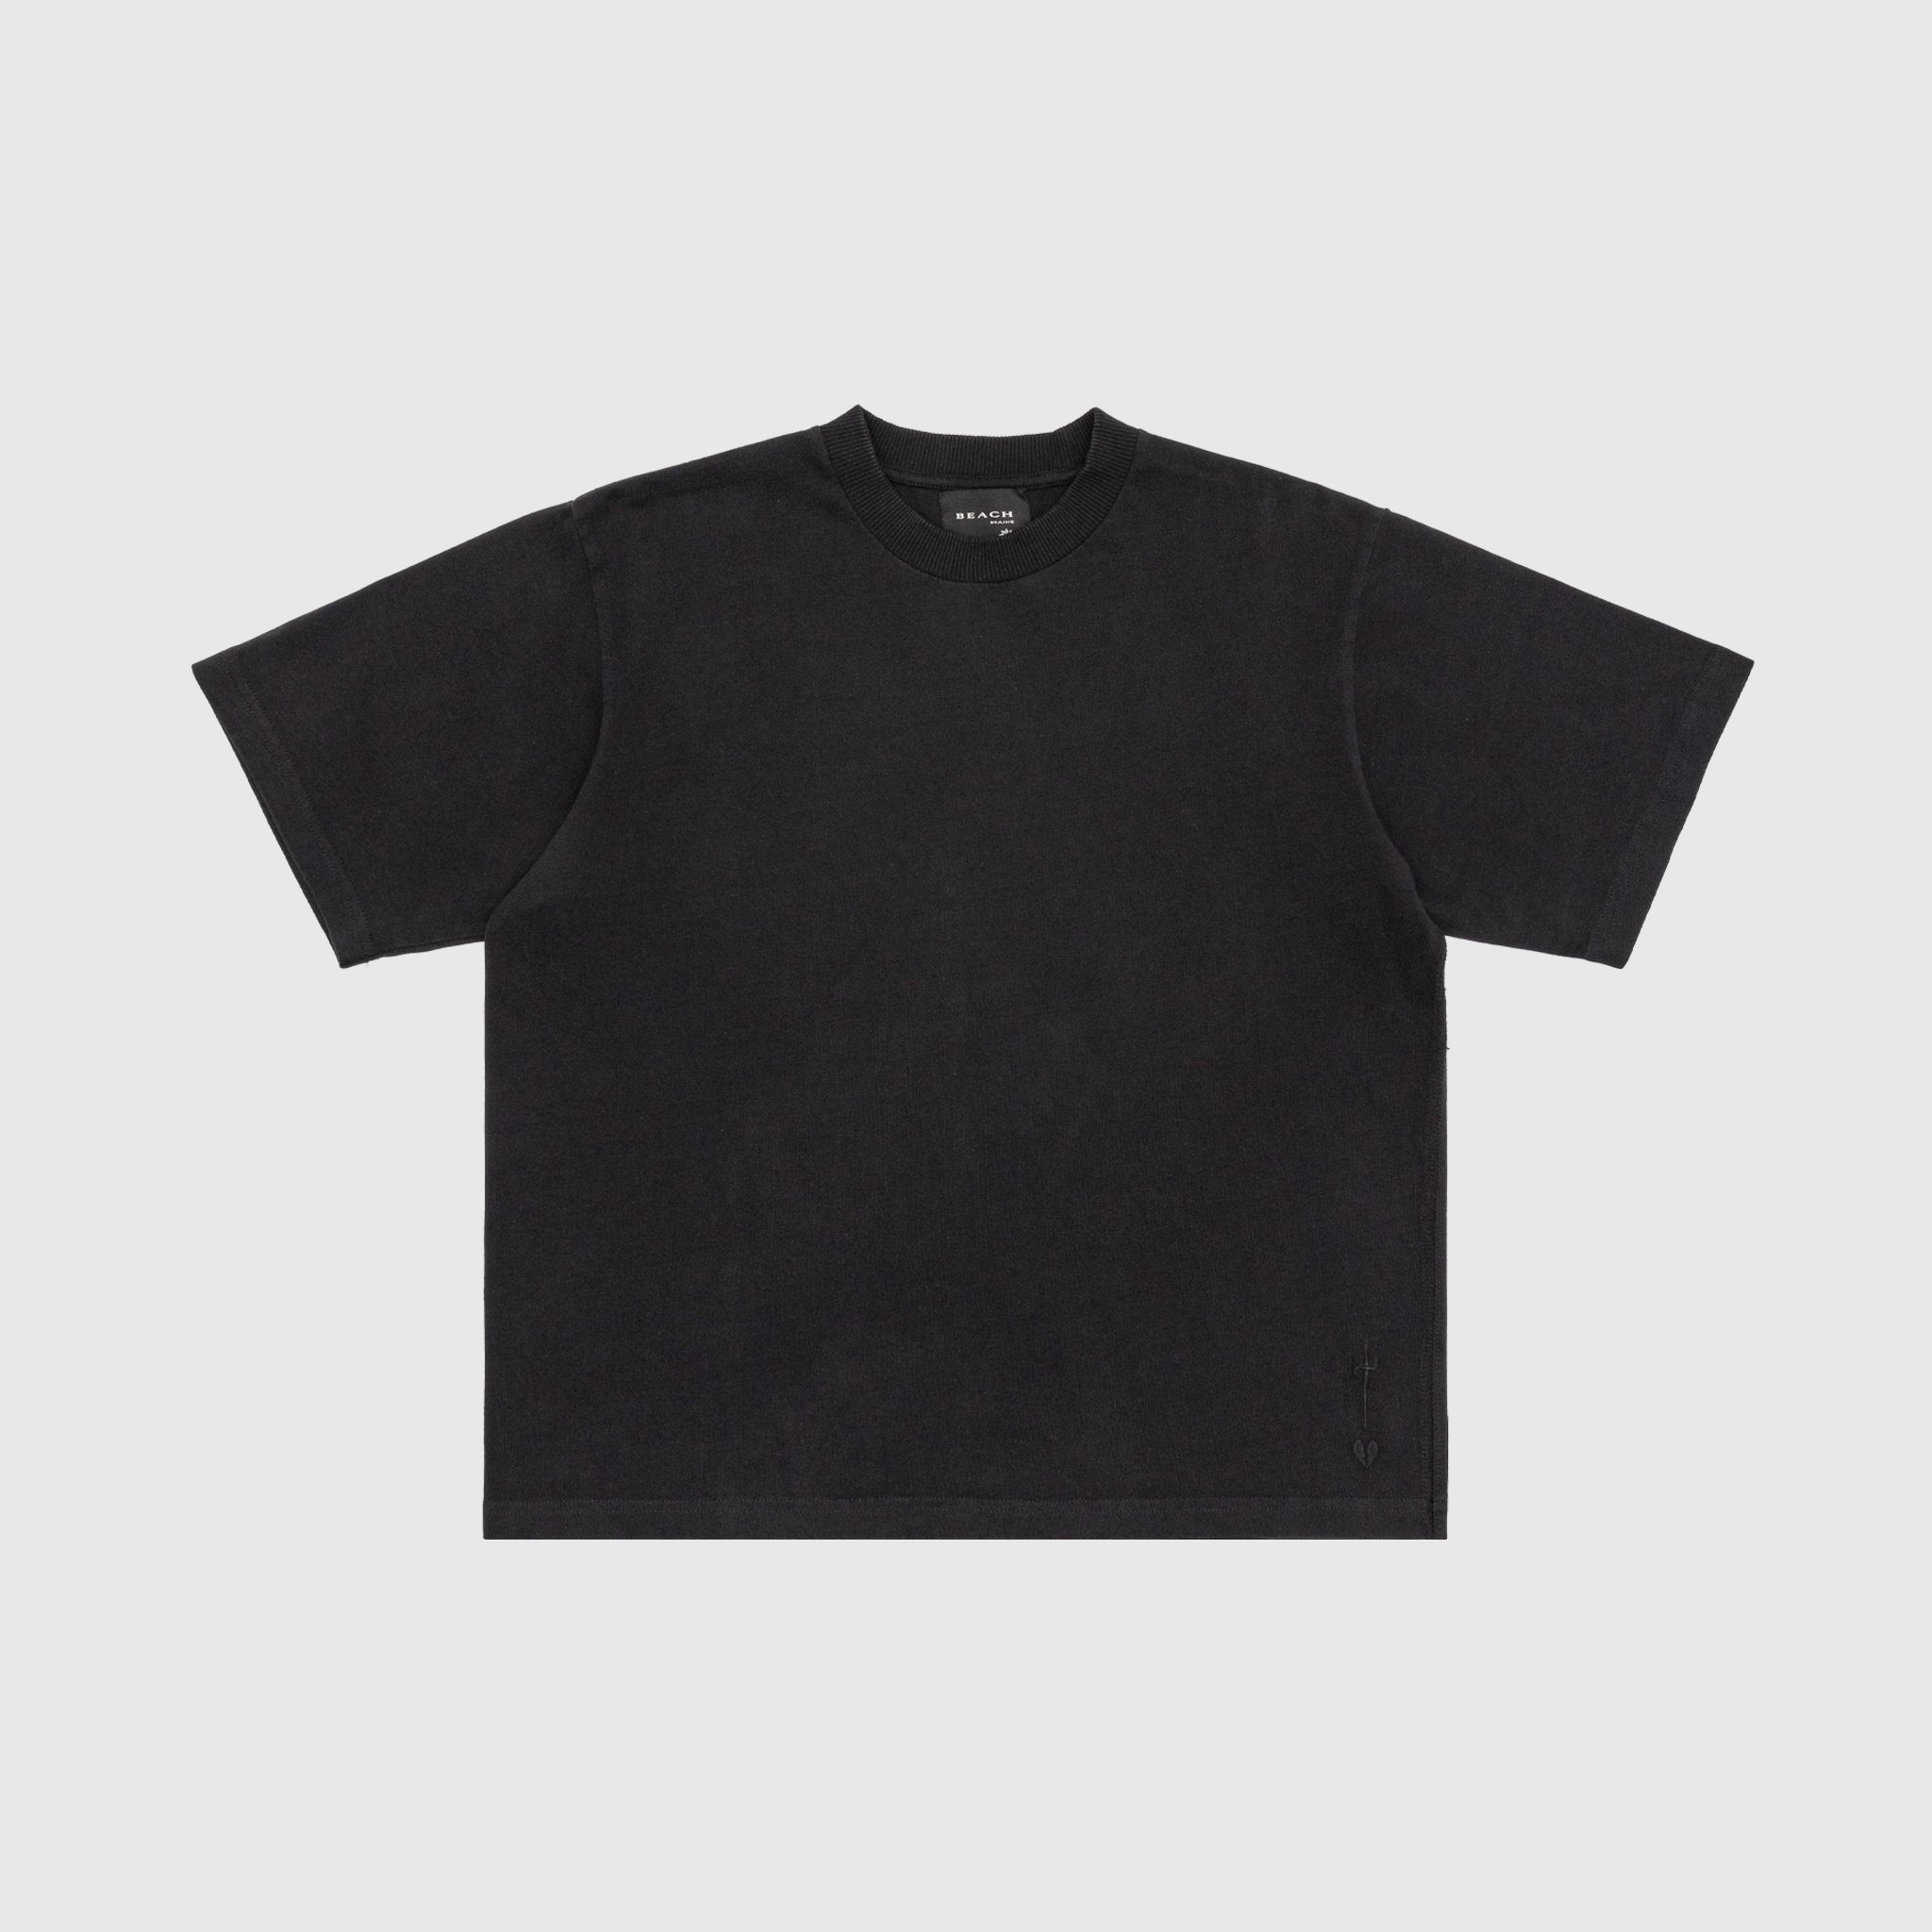 BOXY S/S – SHOES PACKER T-SHIRT